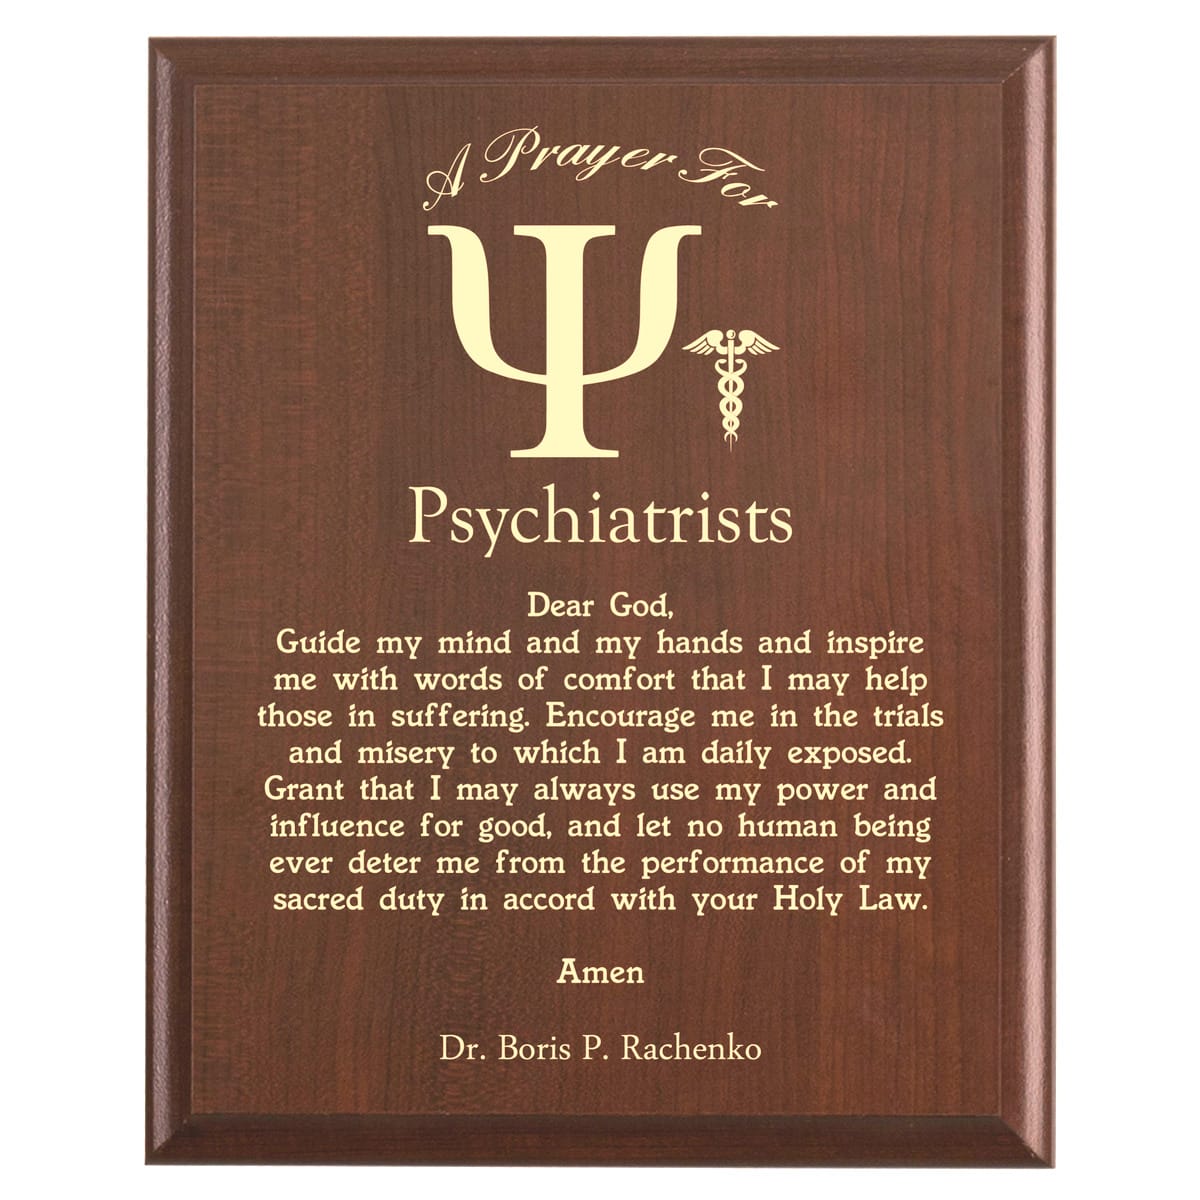 Plaque photo: Psychiatrist Prayer Plaque design with free personalization. Wood style finish with customized text.